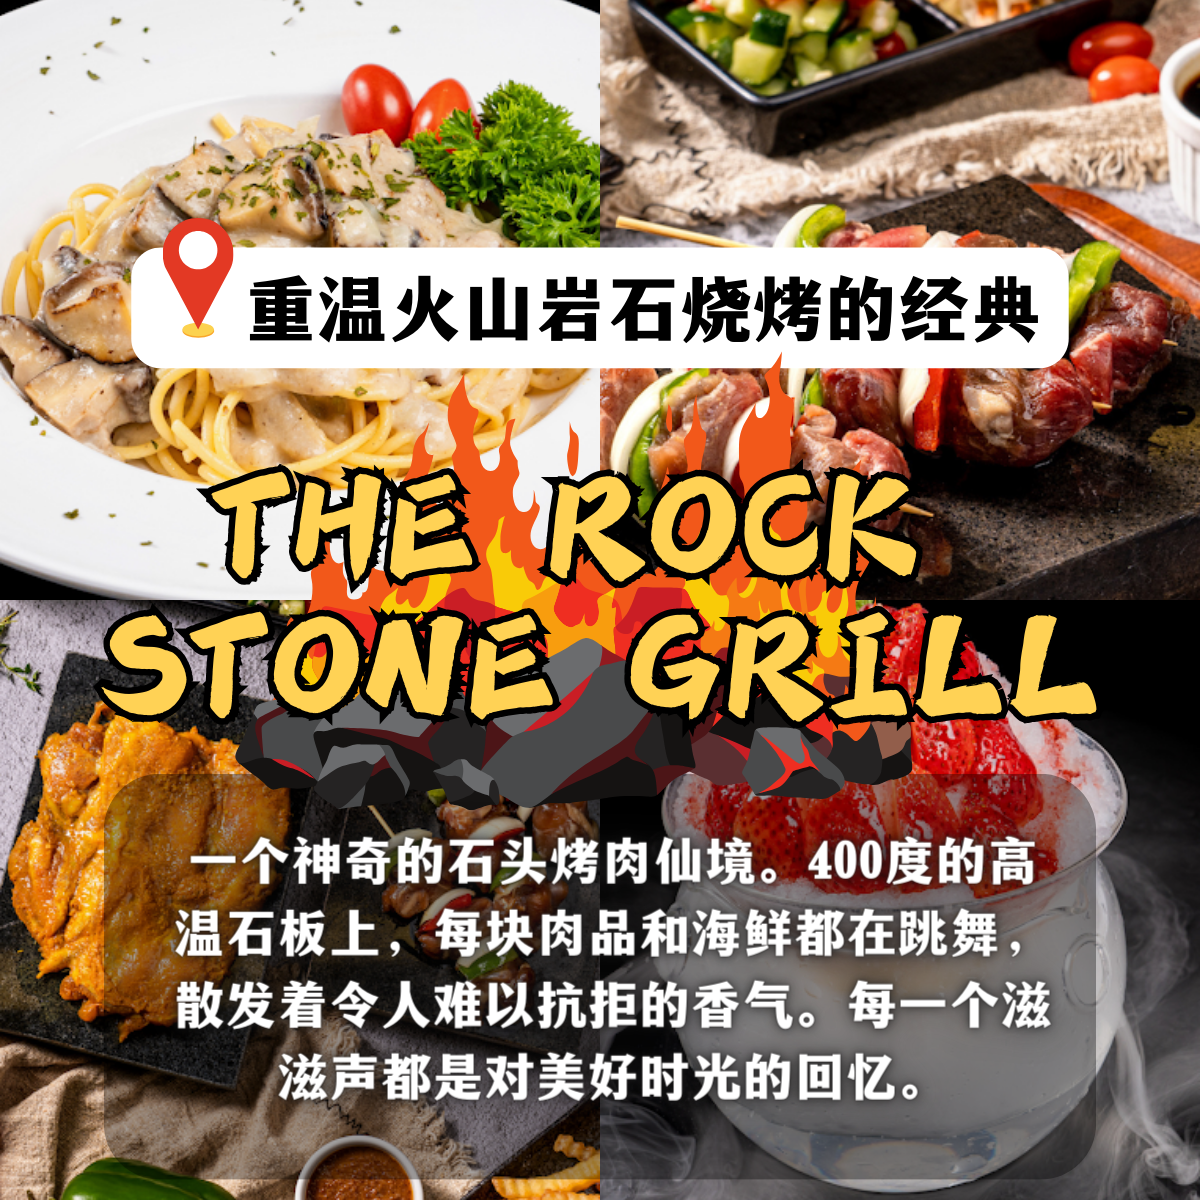 The Rock Stone Grill